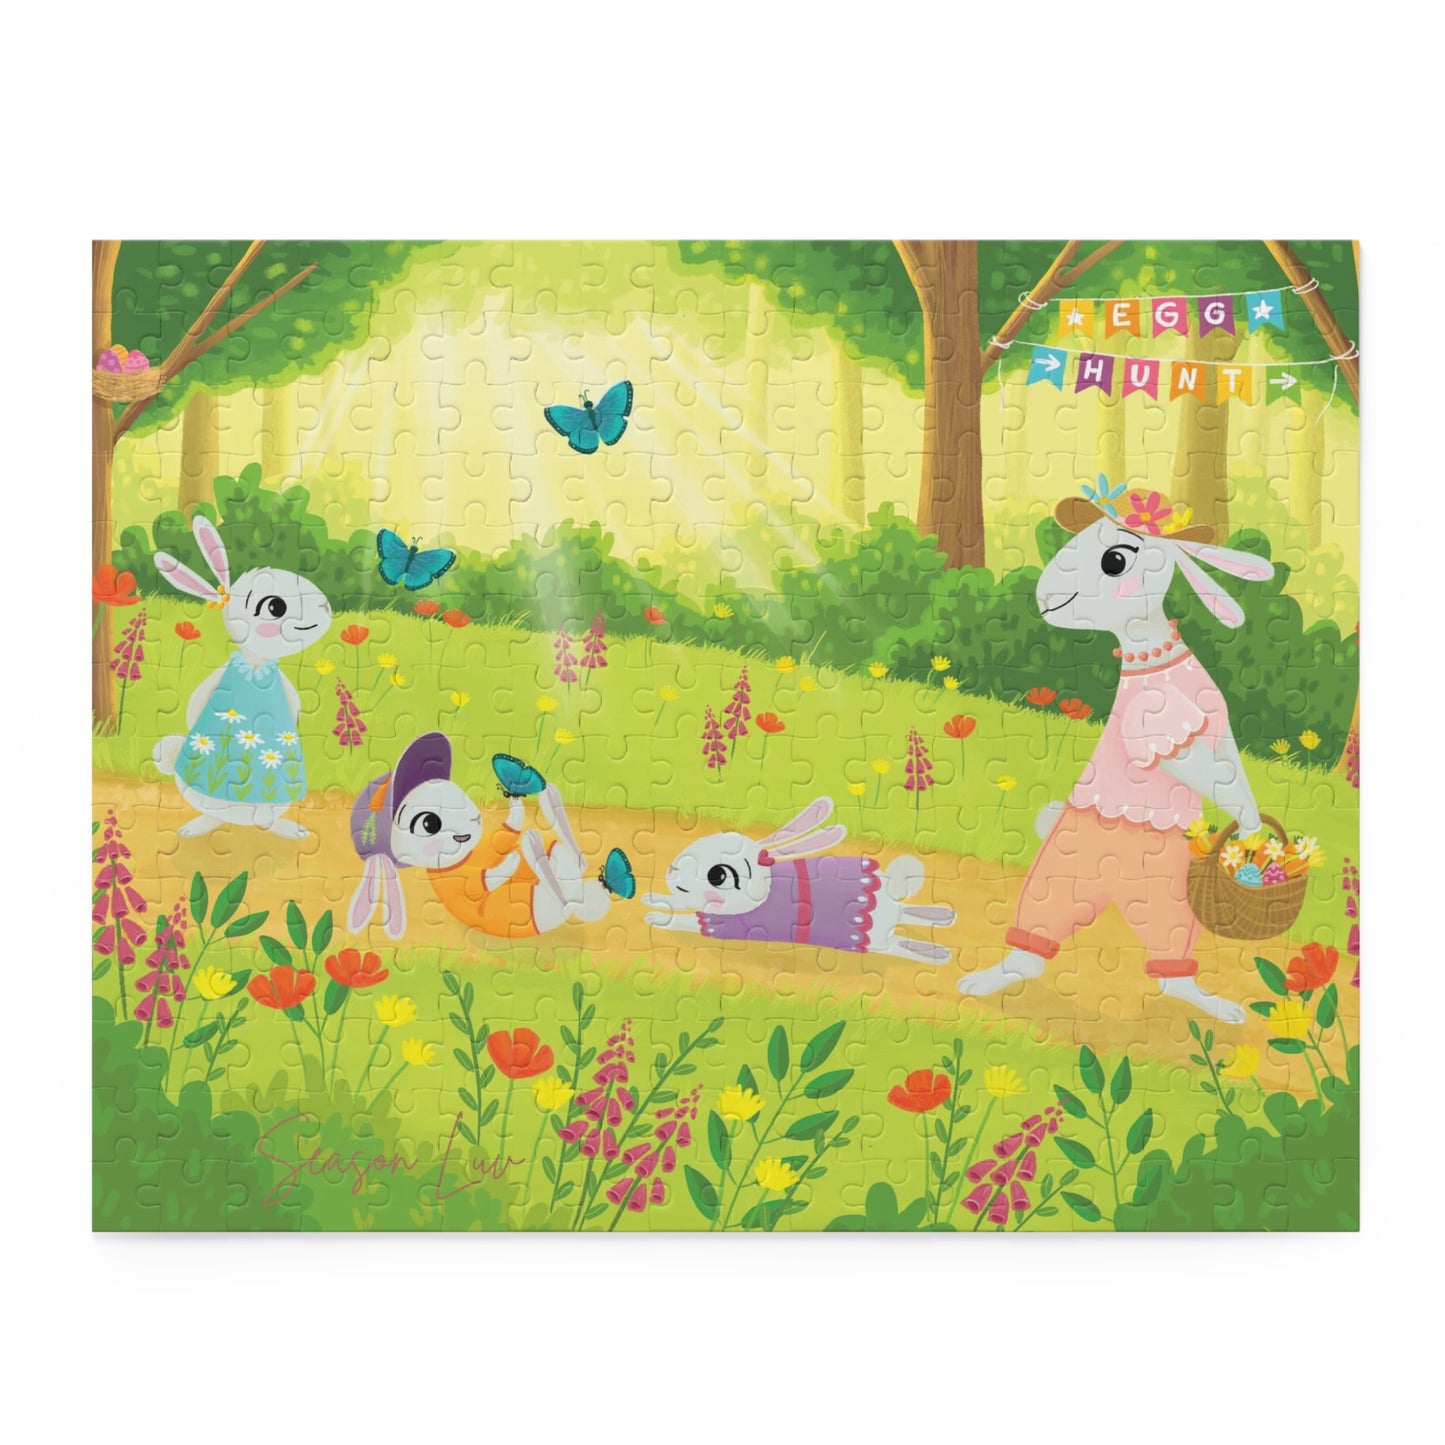 Spring in the forest Puzzle (252-Piece)